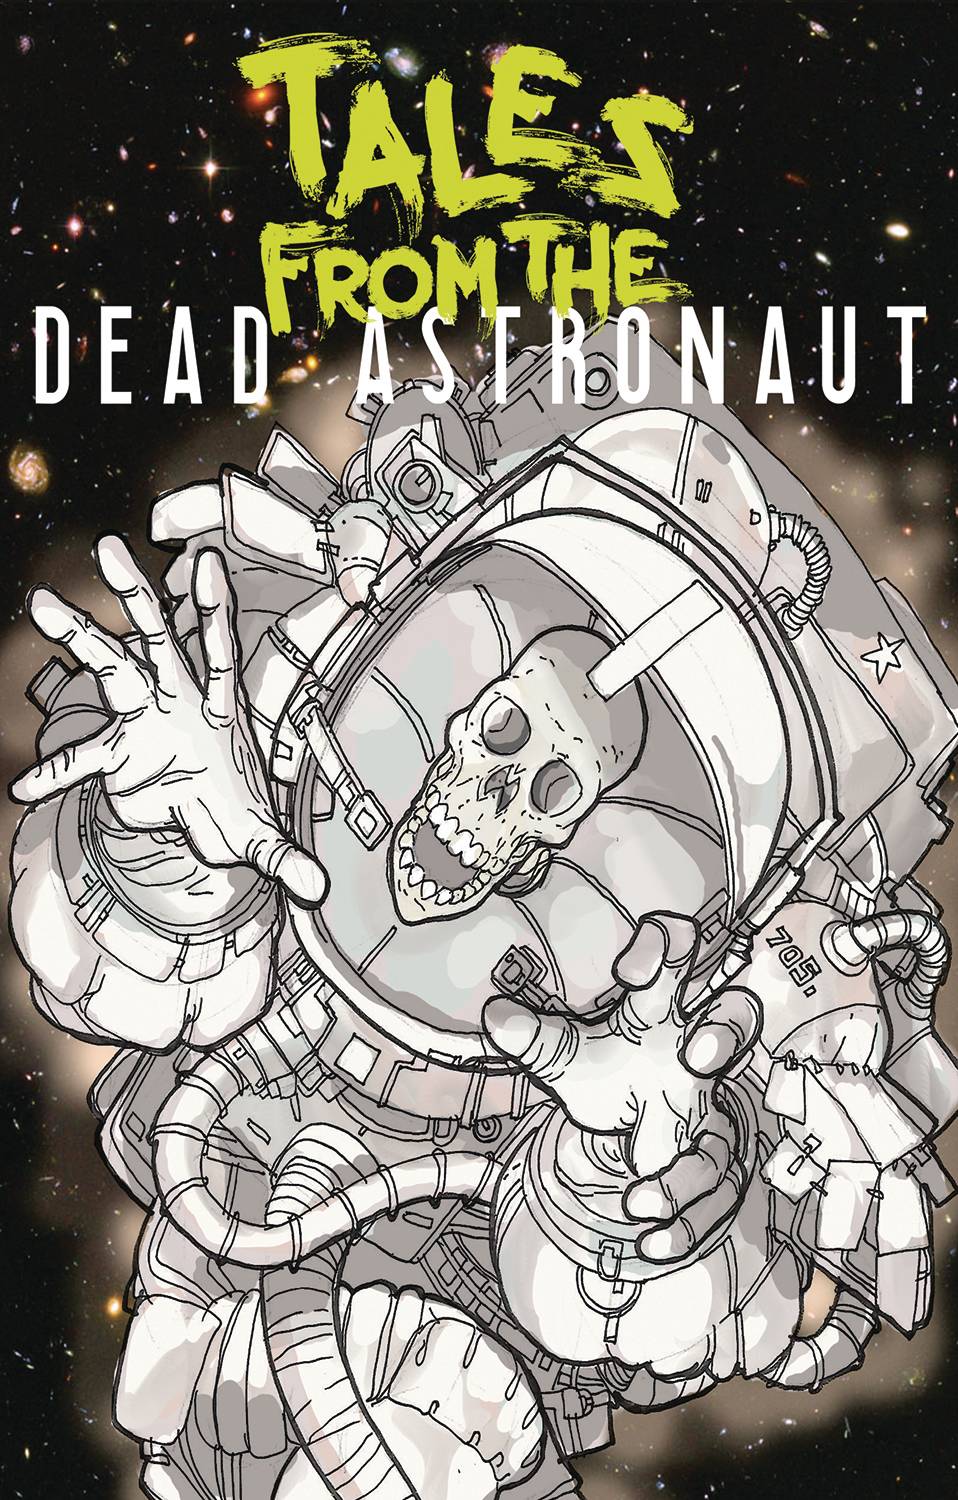 TALES FROM THE DEAD ASTRONAUT #1 (OF 3)